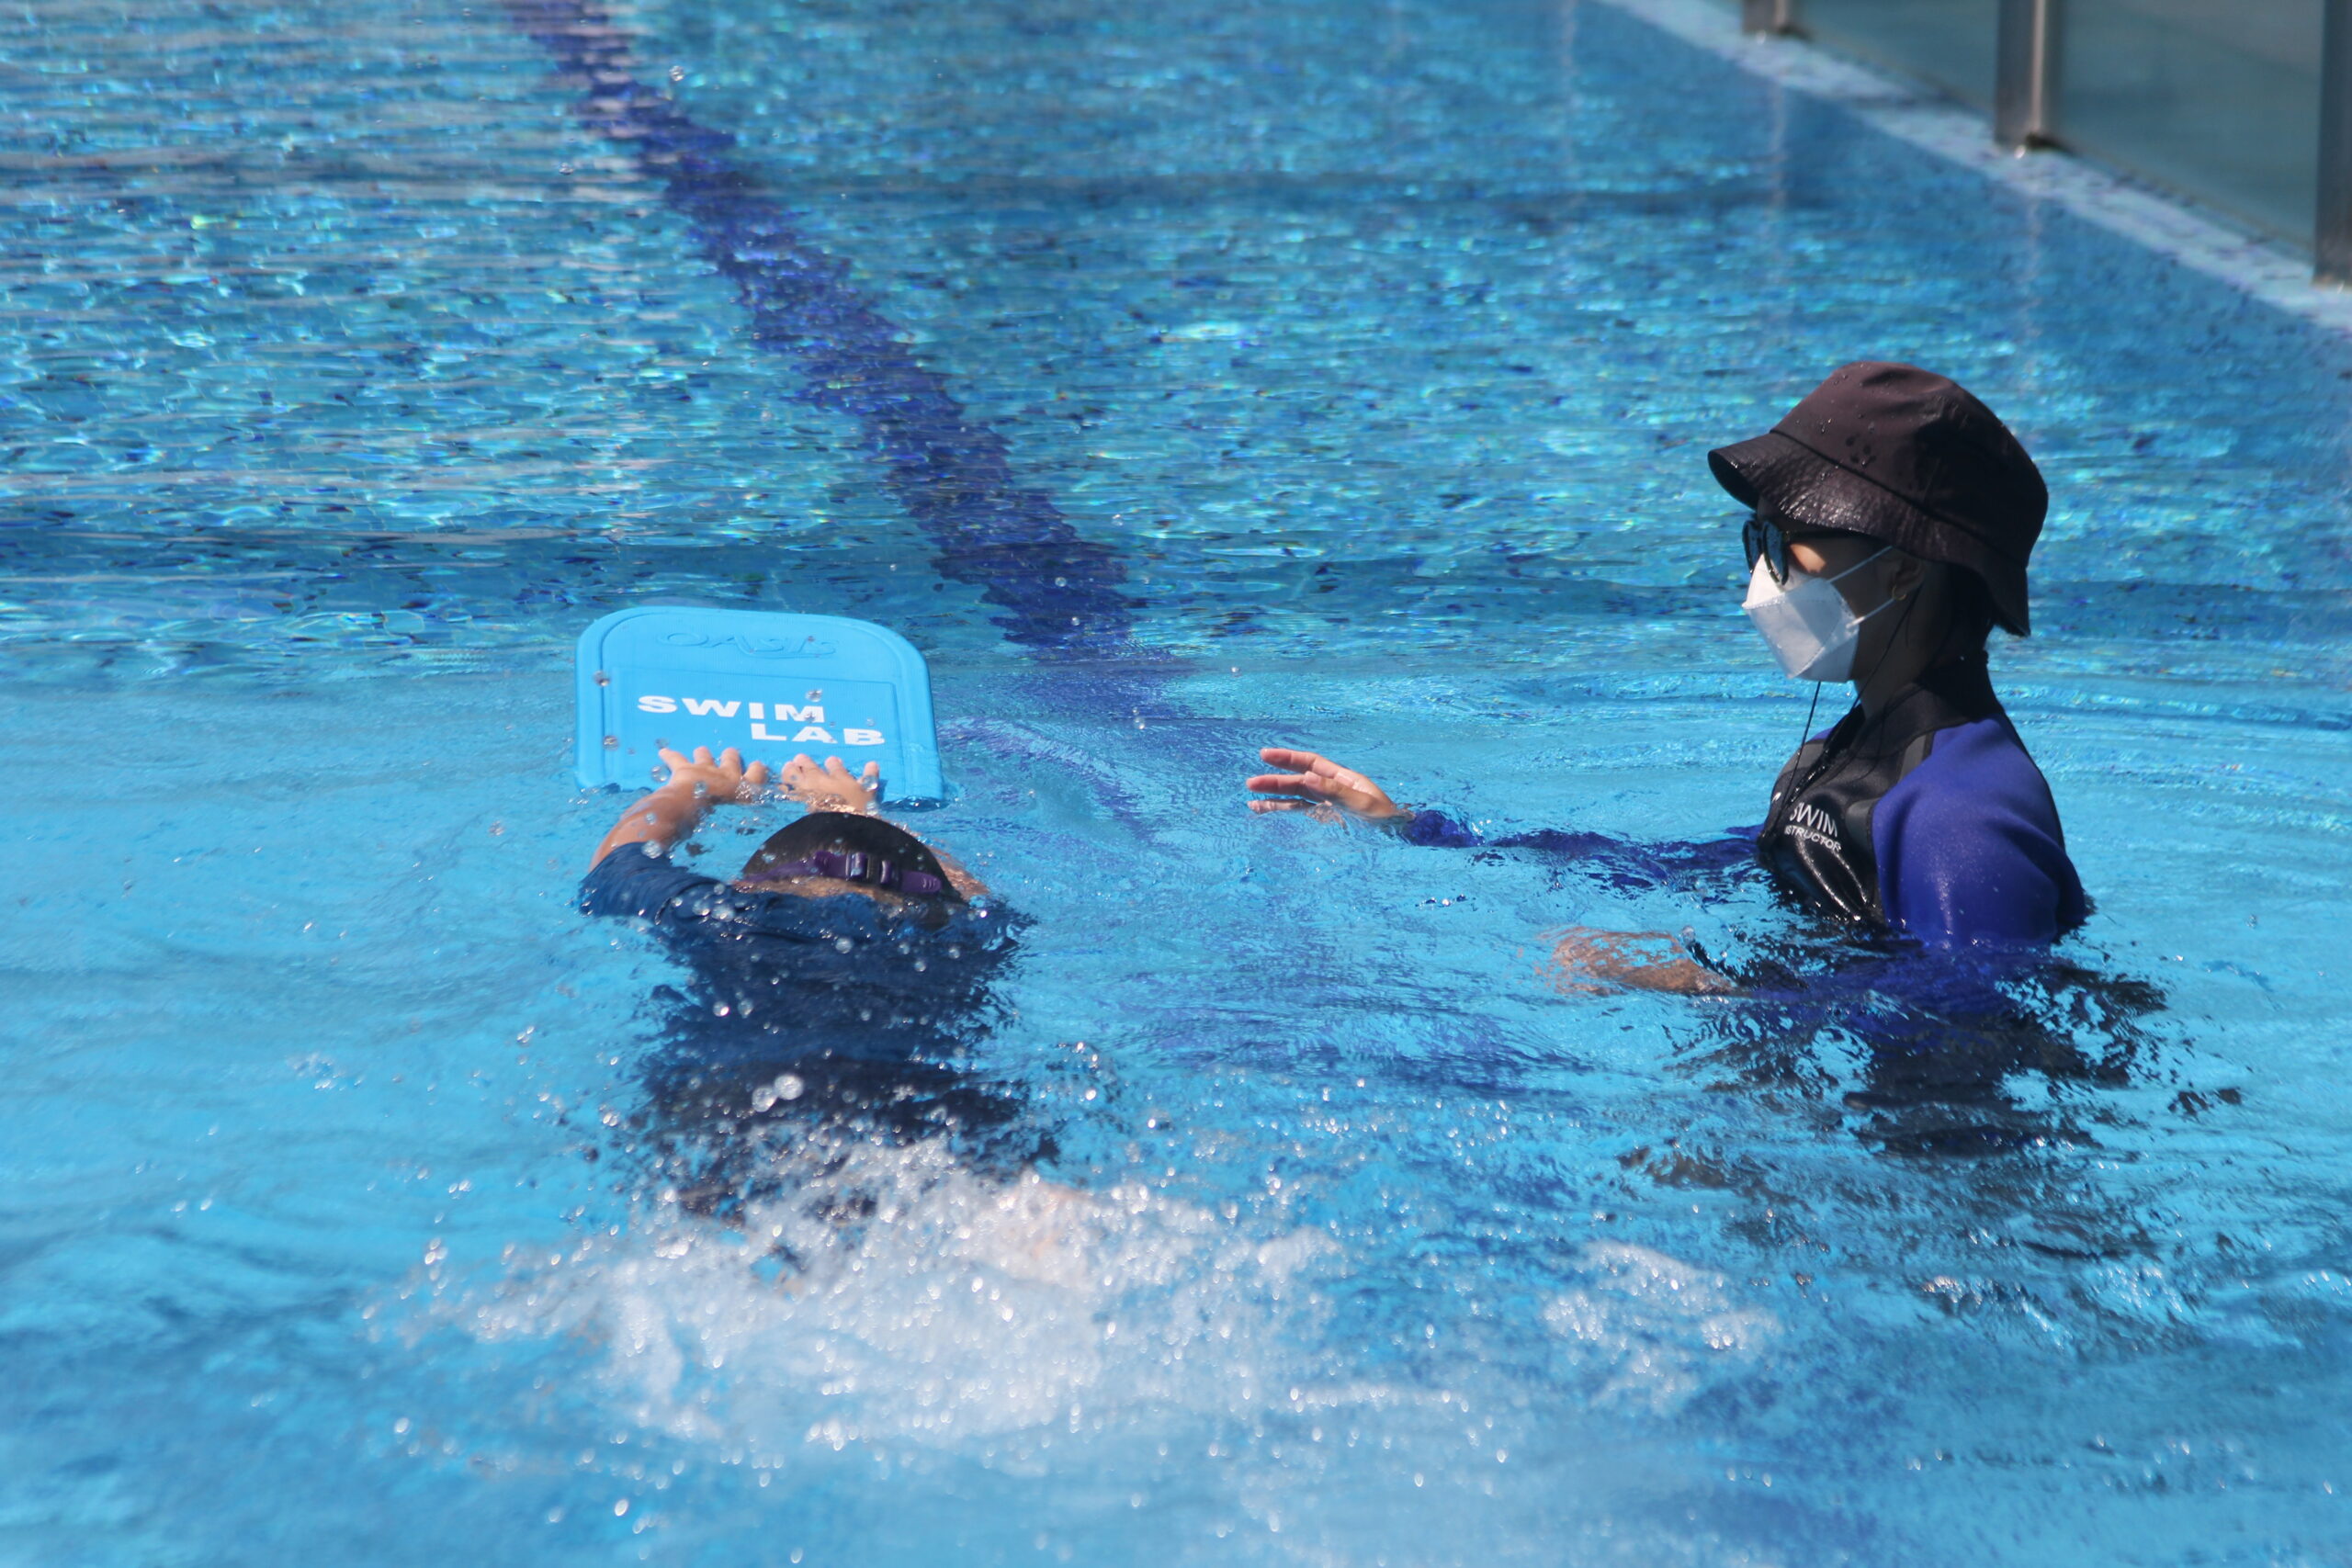 Swim coach guiding a young child in a swimming pool during a lesson.